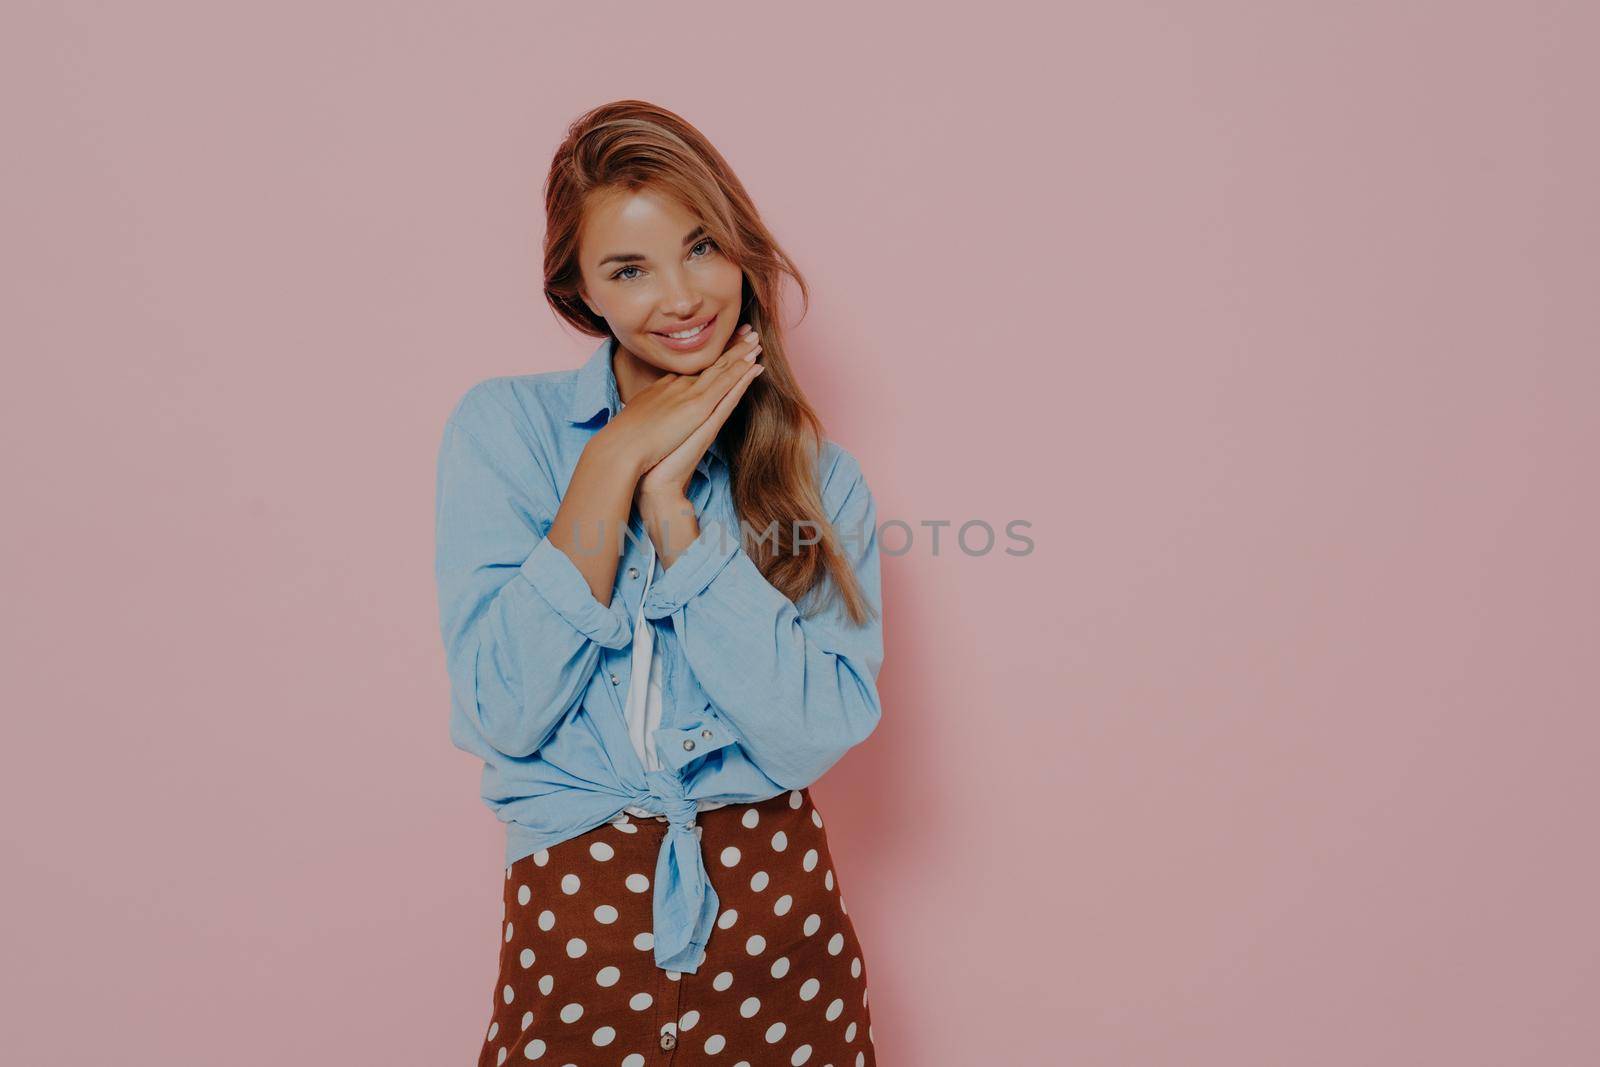 Attractive woman in stylish outfit against pink background by vkstock